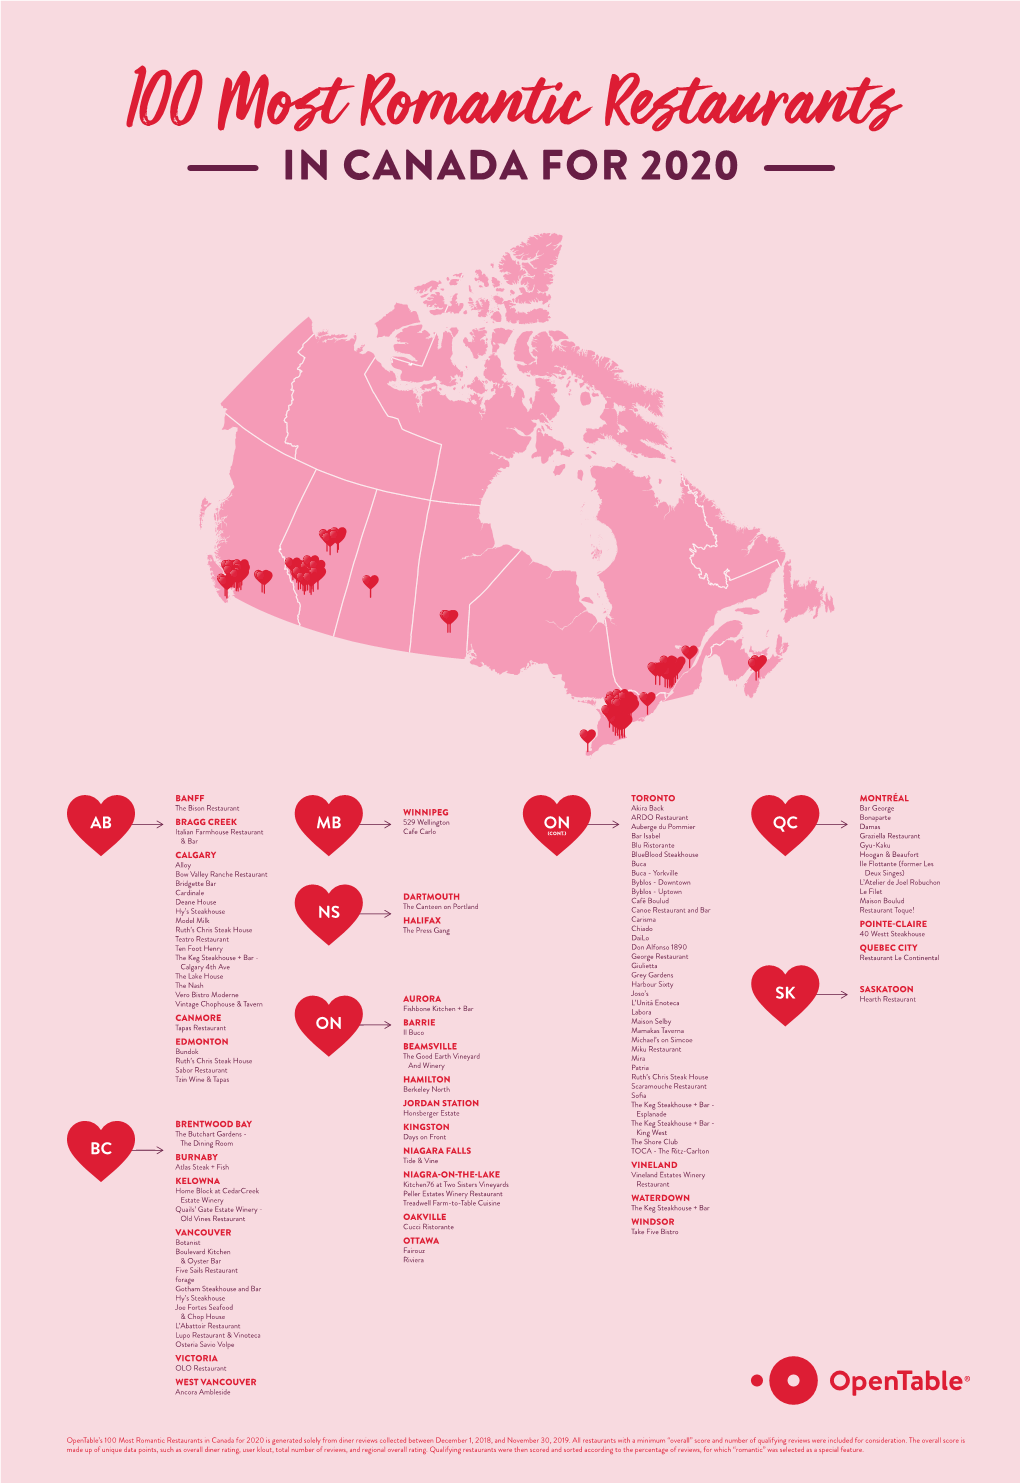 100 Most Romantic Restaurants in Canada for 2020 Is Generated Solely from Diner Reviews Collected Between December 1, 2018, and November 30, 2019